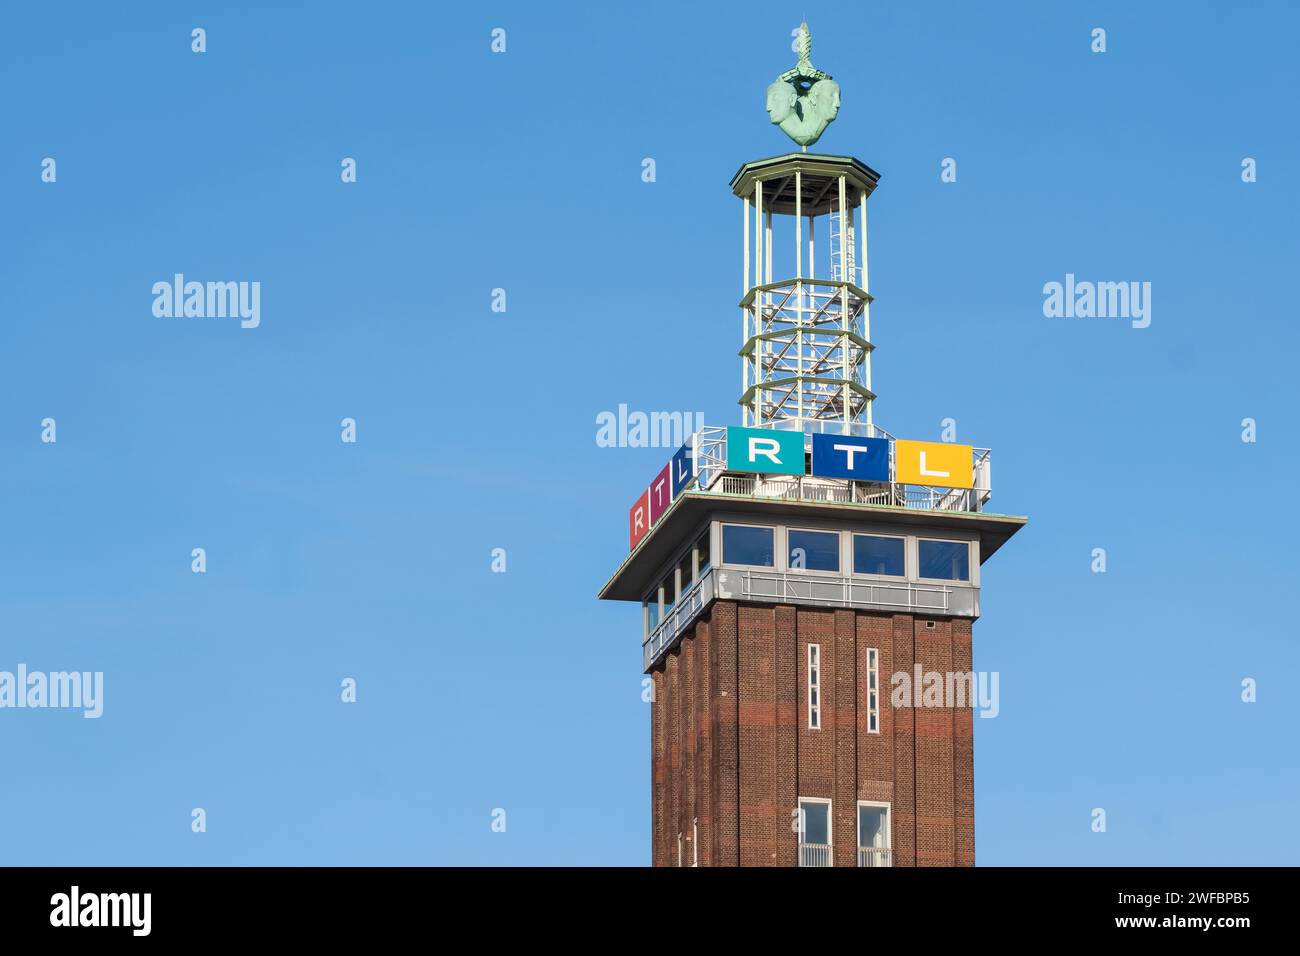 Trade fair tower with the logos of RTL Radio Tele Luxemburg at the headquarters of the private broadcaster in Cologne's Deutz district. Stock Photo